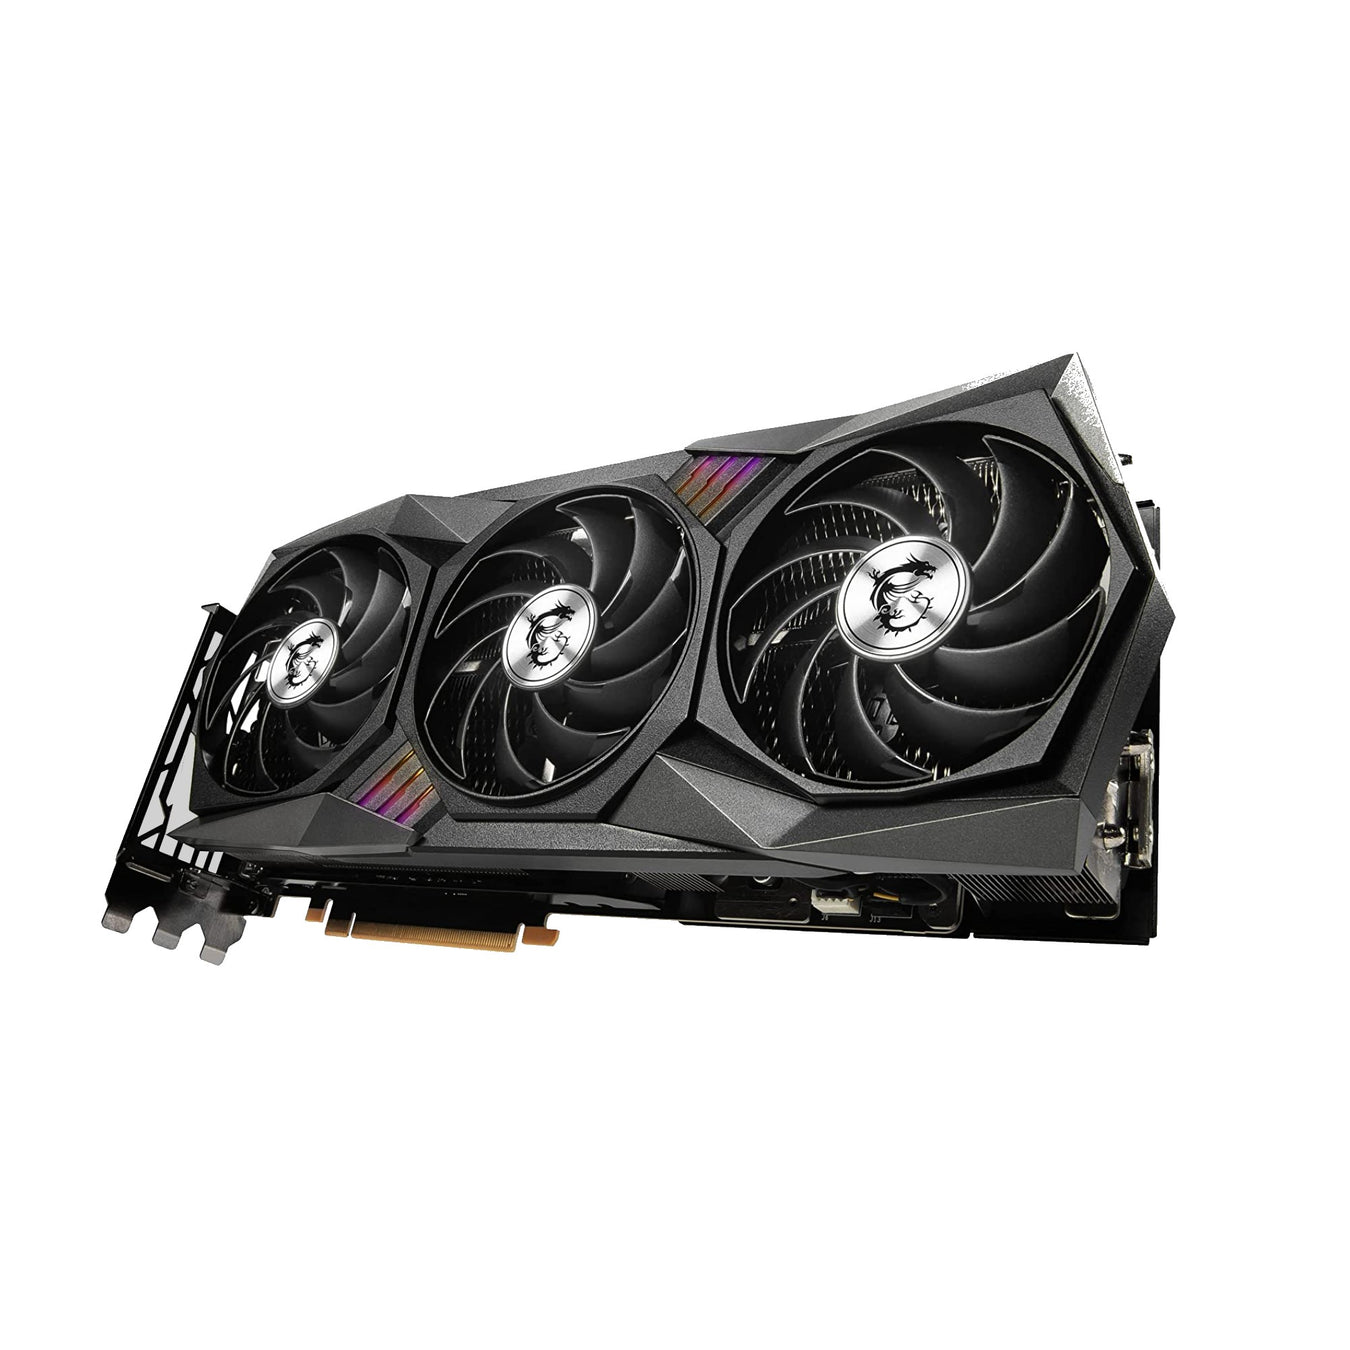 NVidia Graphics Cards and AMD Radeon GPUs for gaming, work and mining.